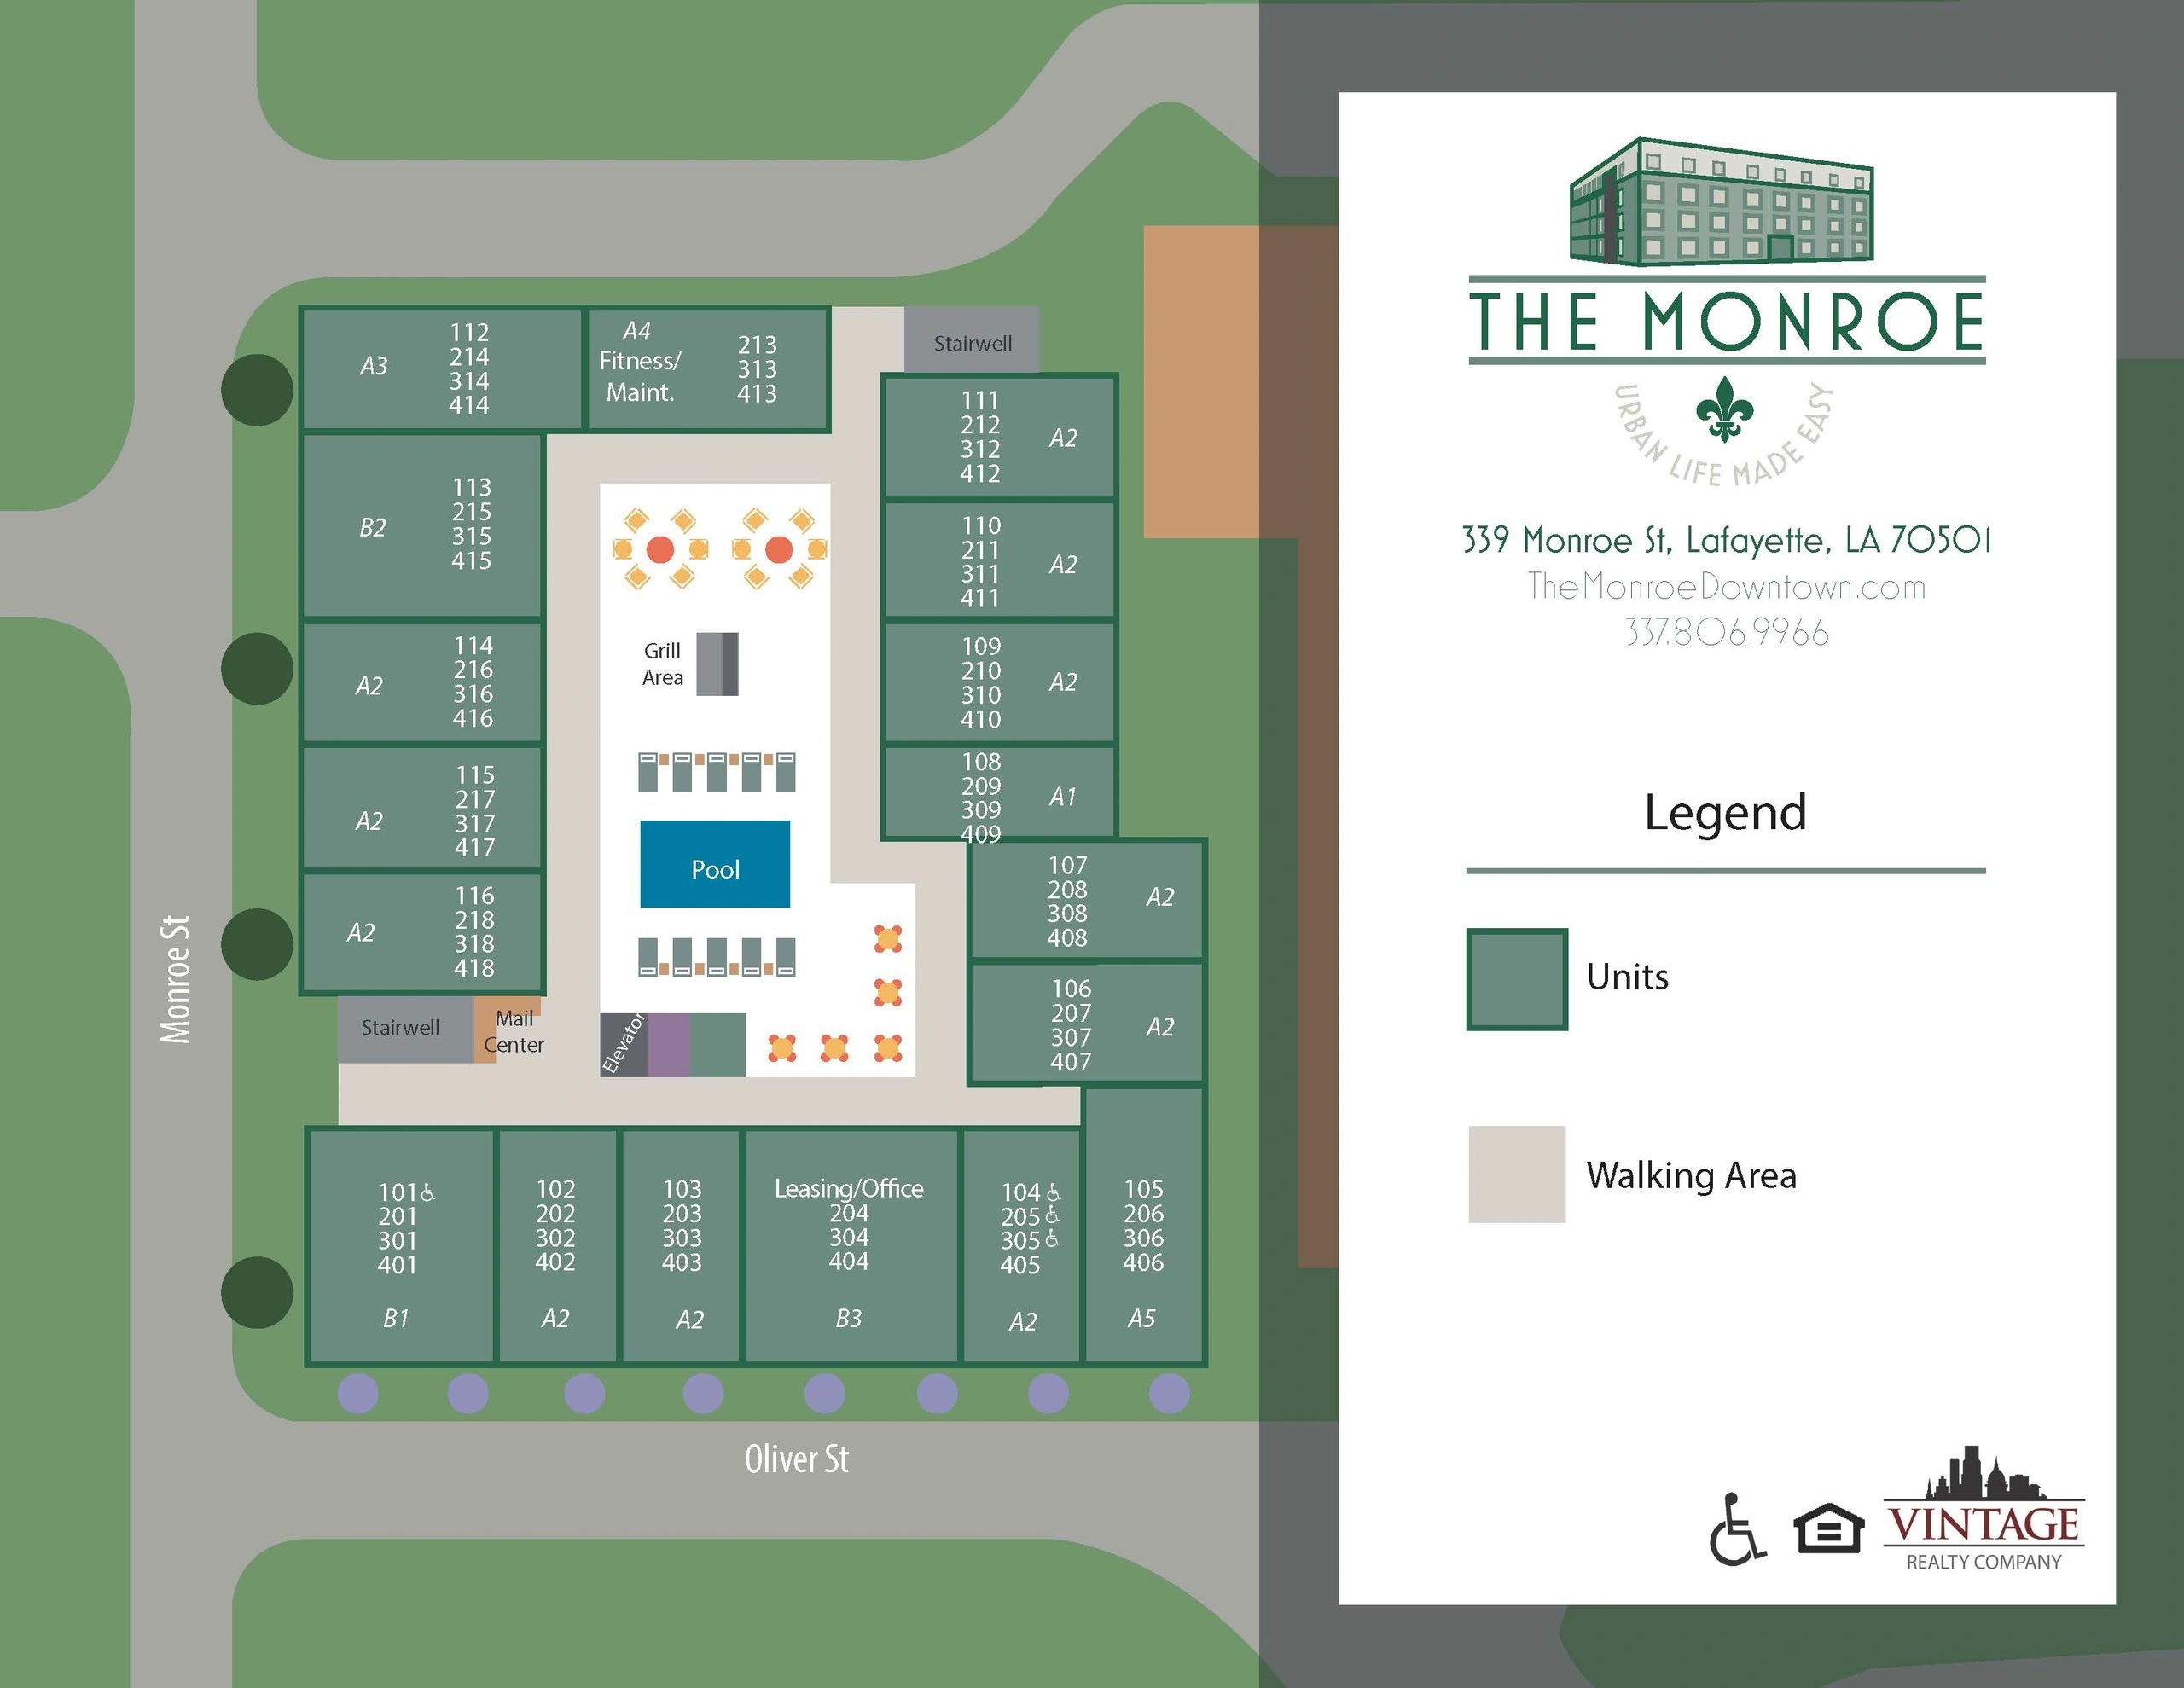 Unit Community Map of The Monroe Downtown in Lafayette